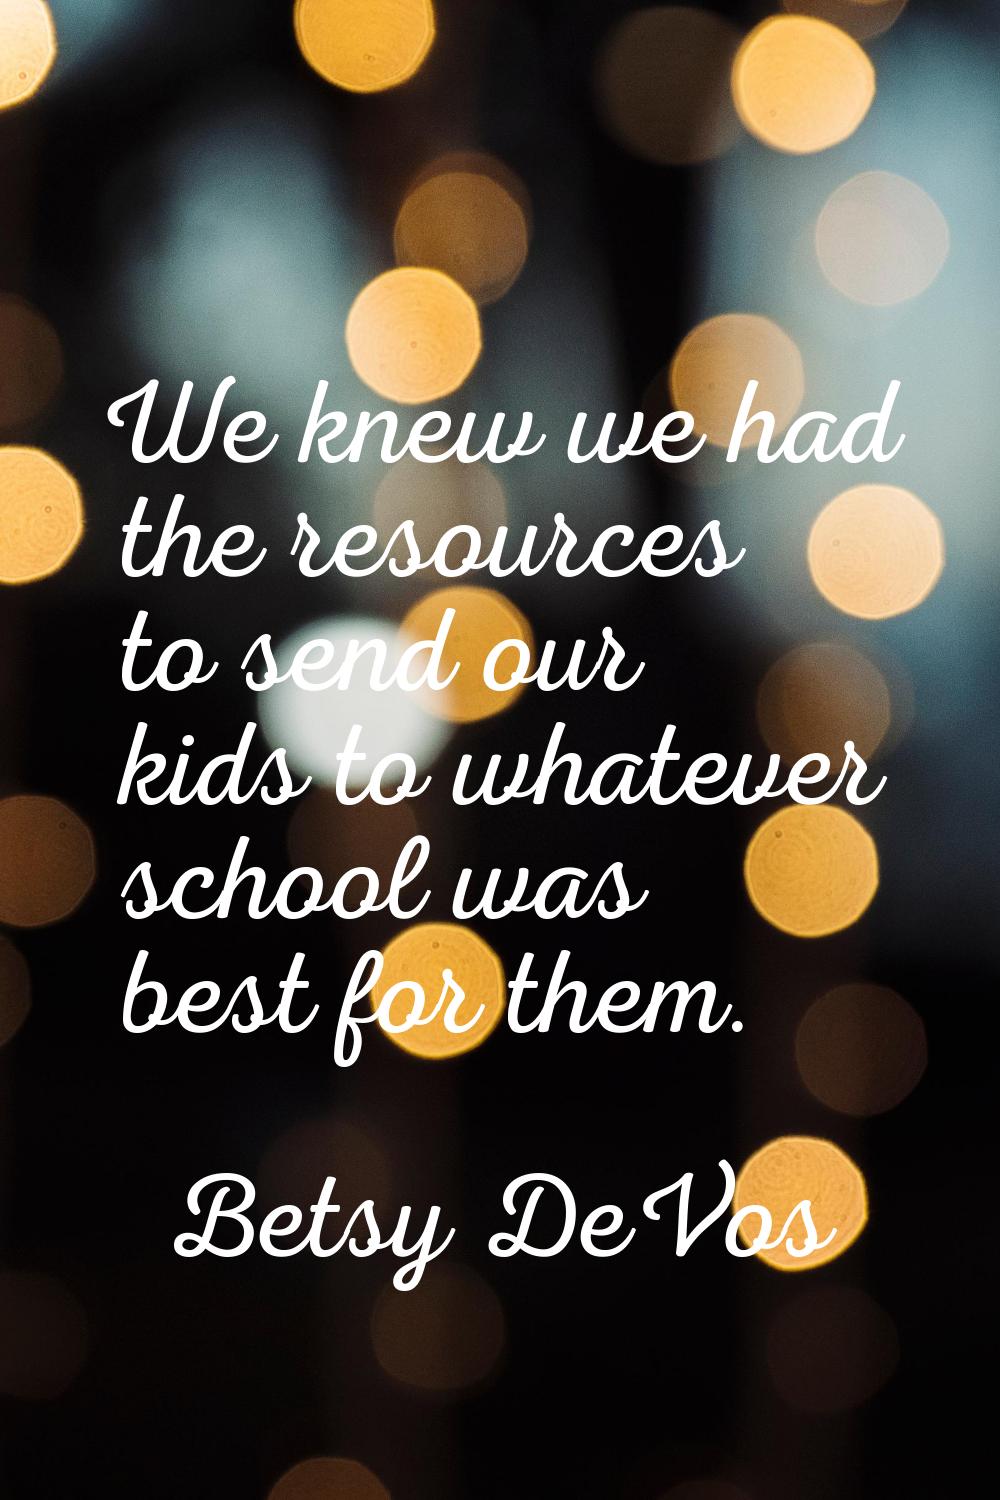 We knew we had the resources to send our kids to whatever school was best for them.